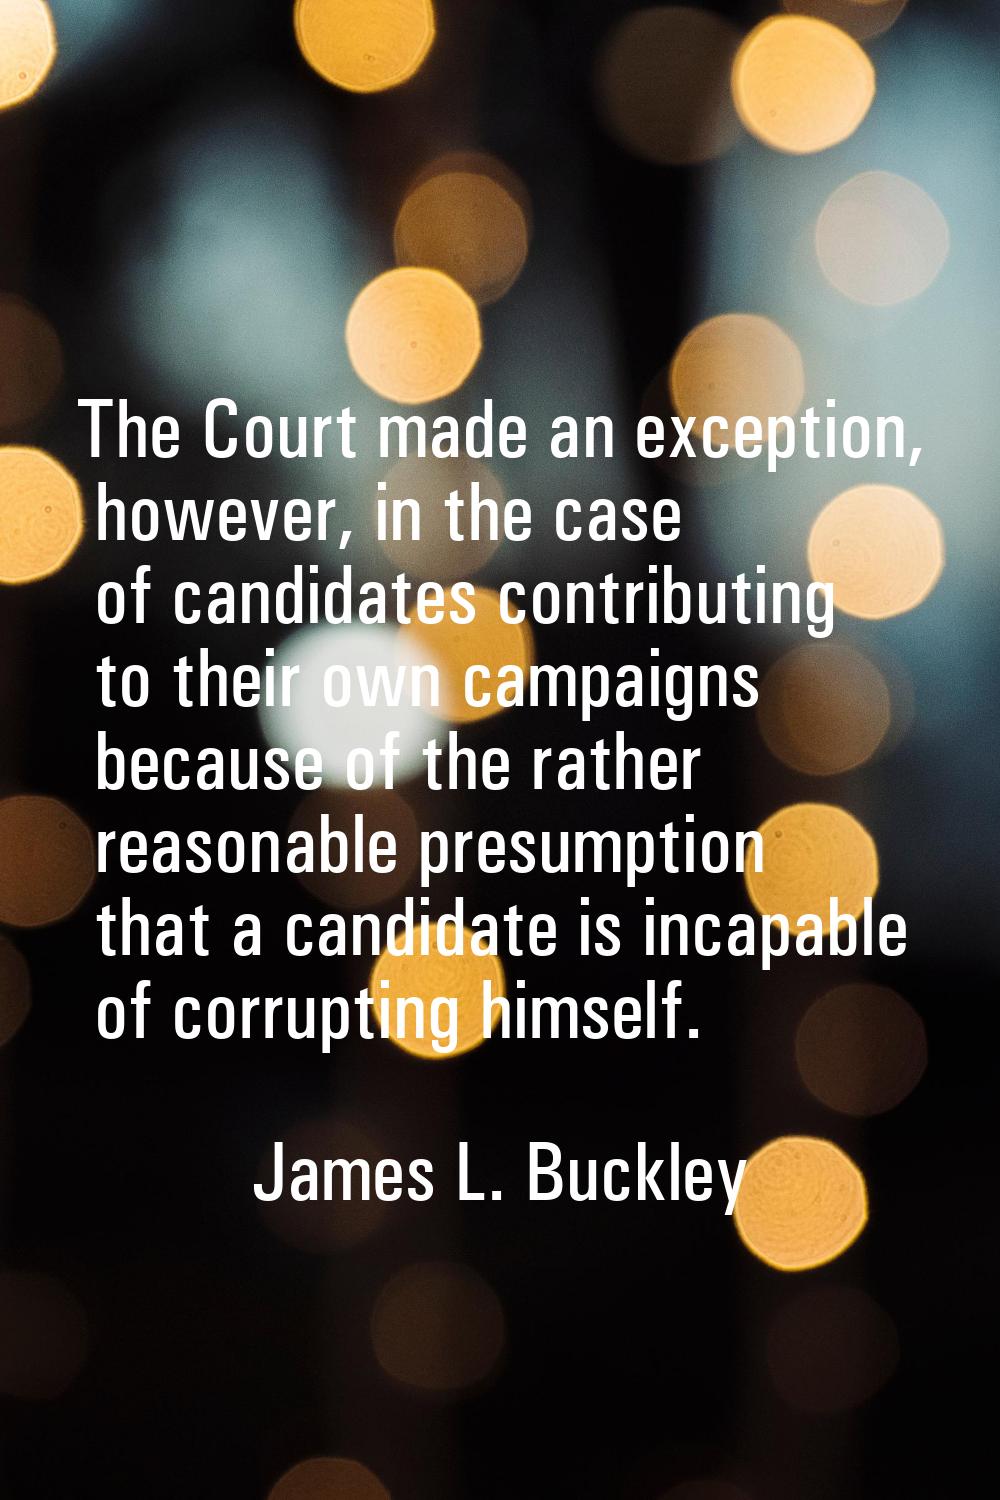 The Court made an exception, however, in the case of candidates contributing to their own campaigns